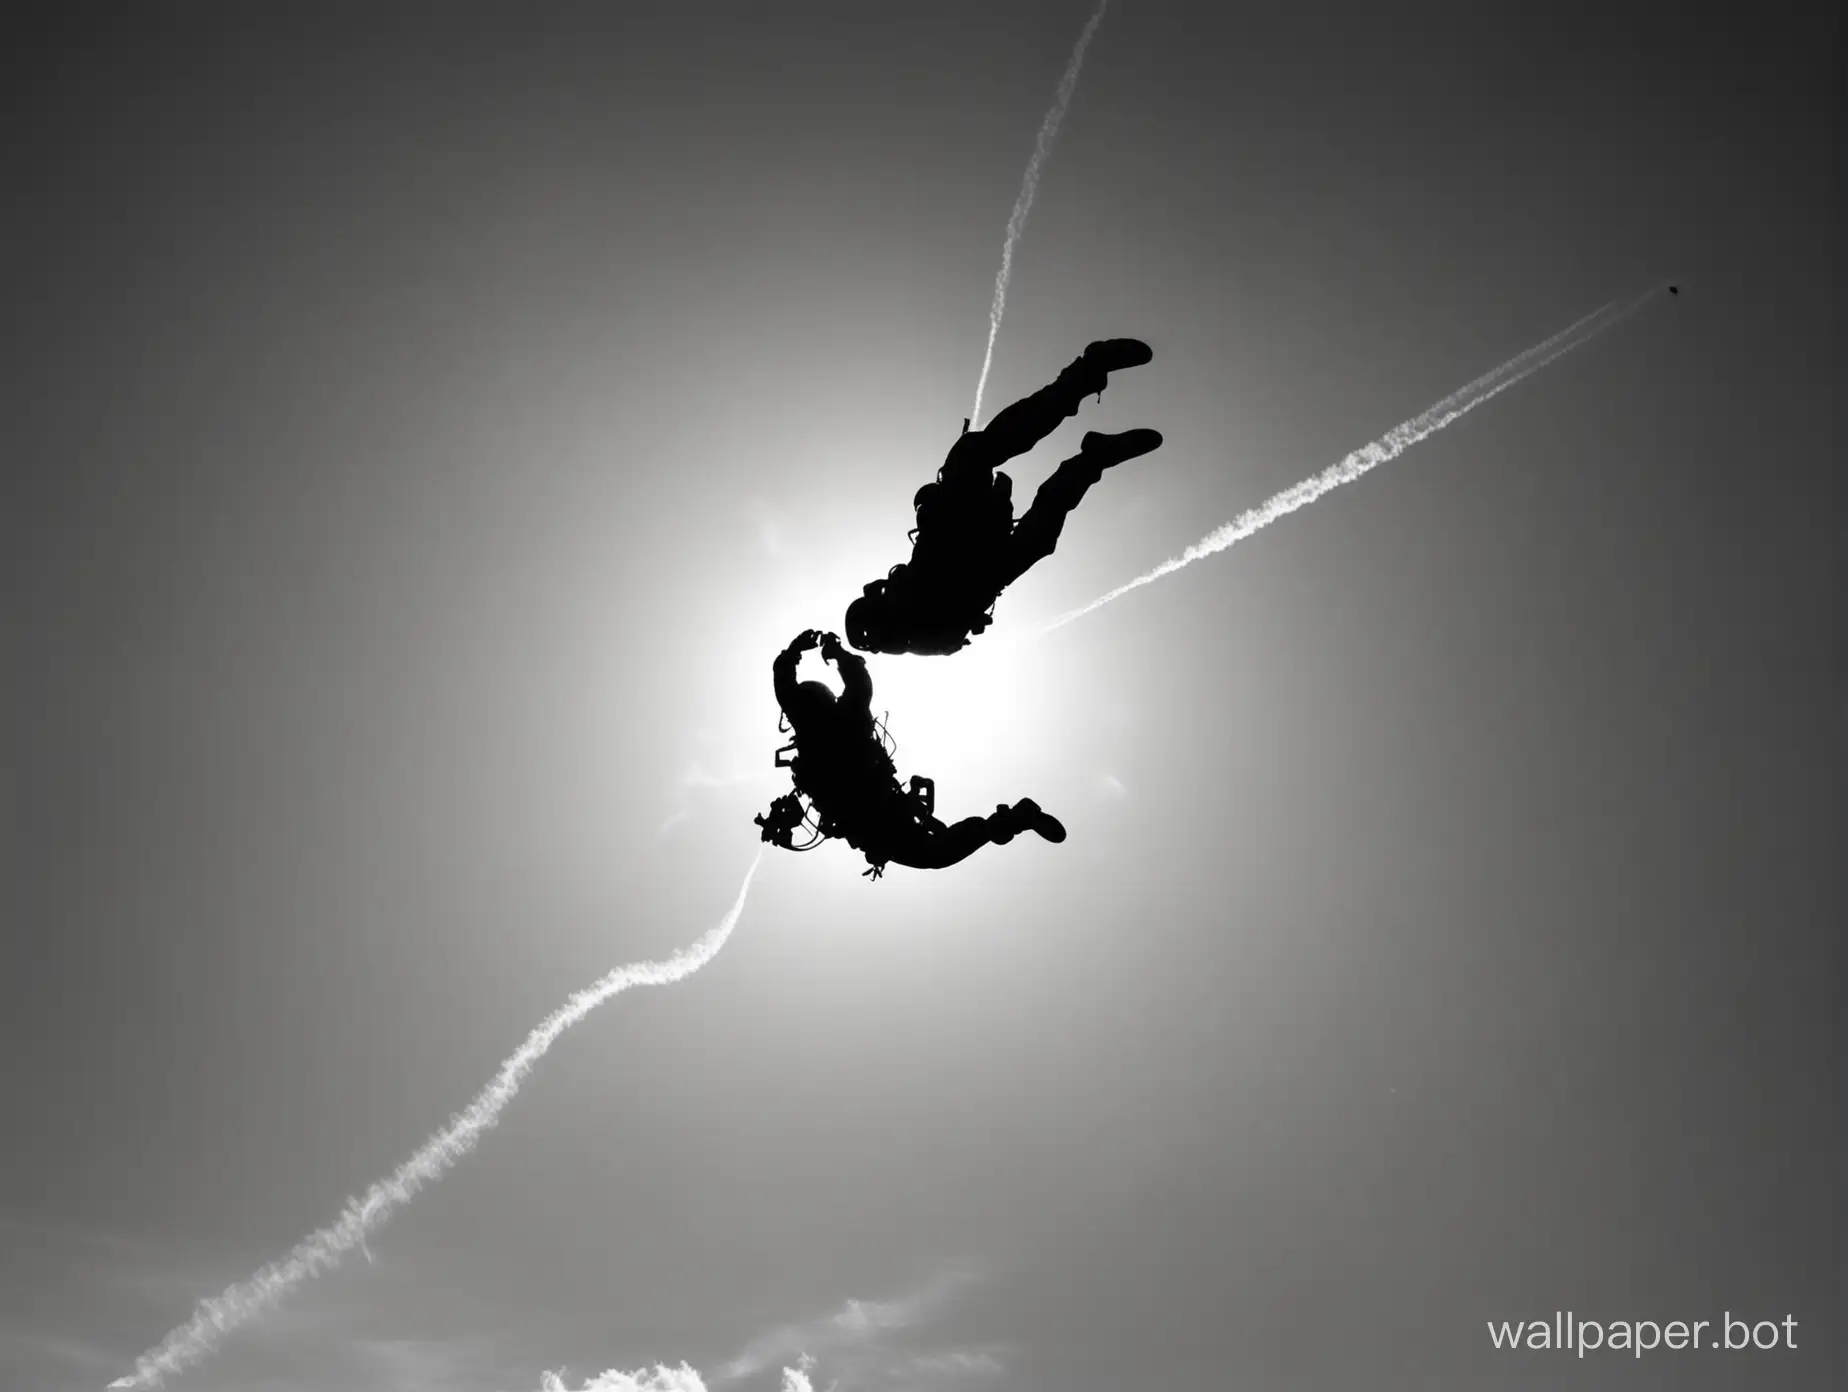 land sky view background,black profil silhouette of a sky diver